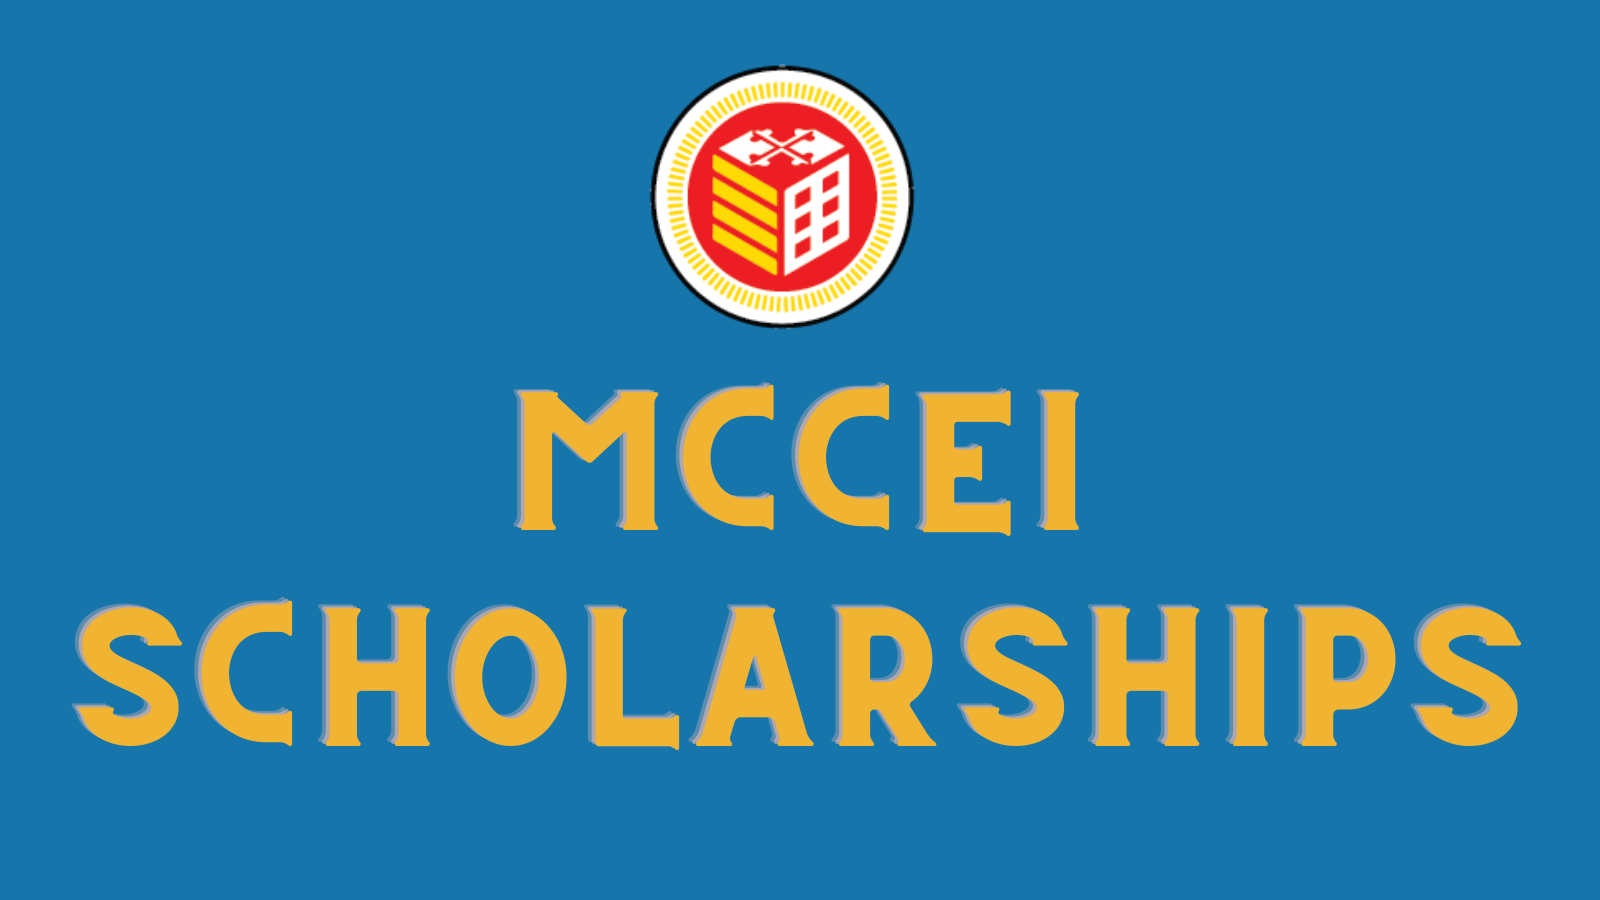 Mccei Scholarships Maryland Center For Construction Education Innovation